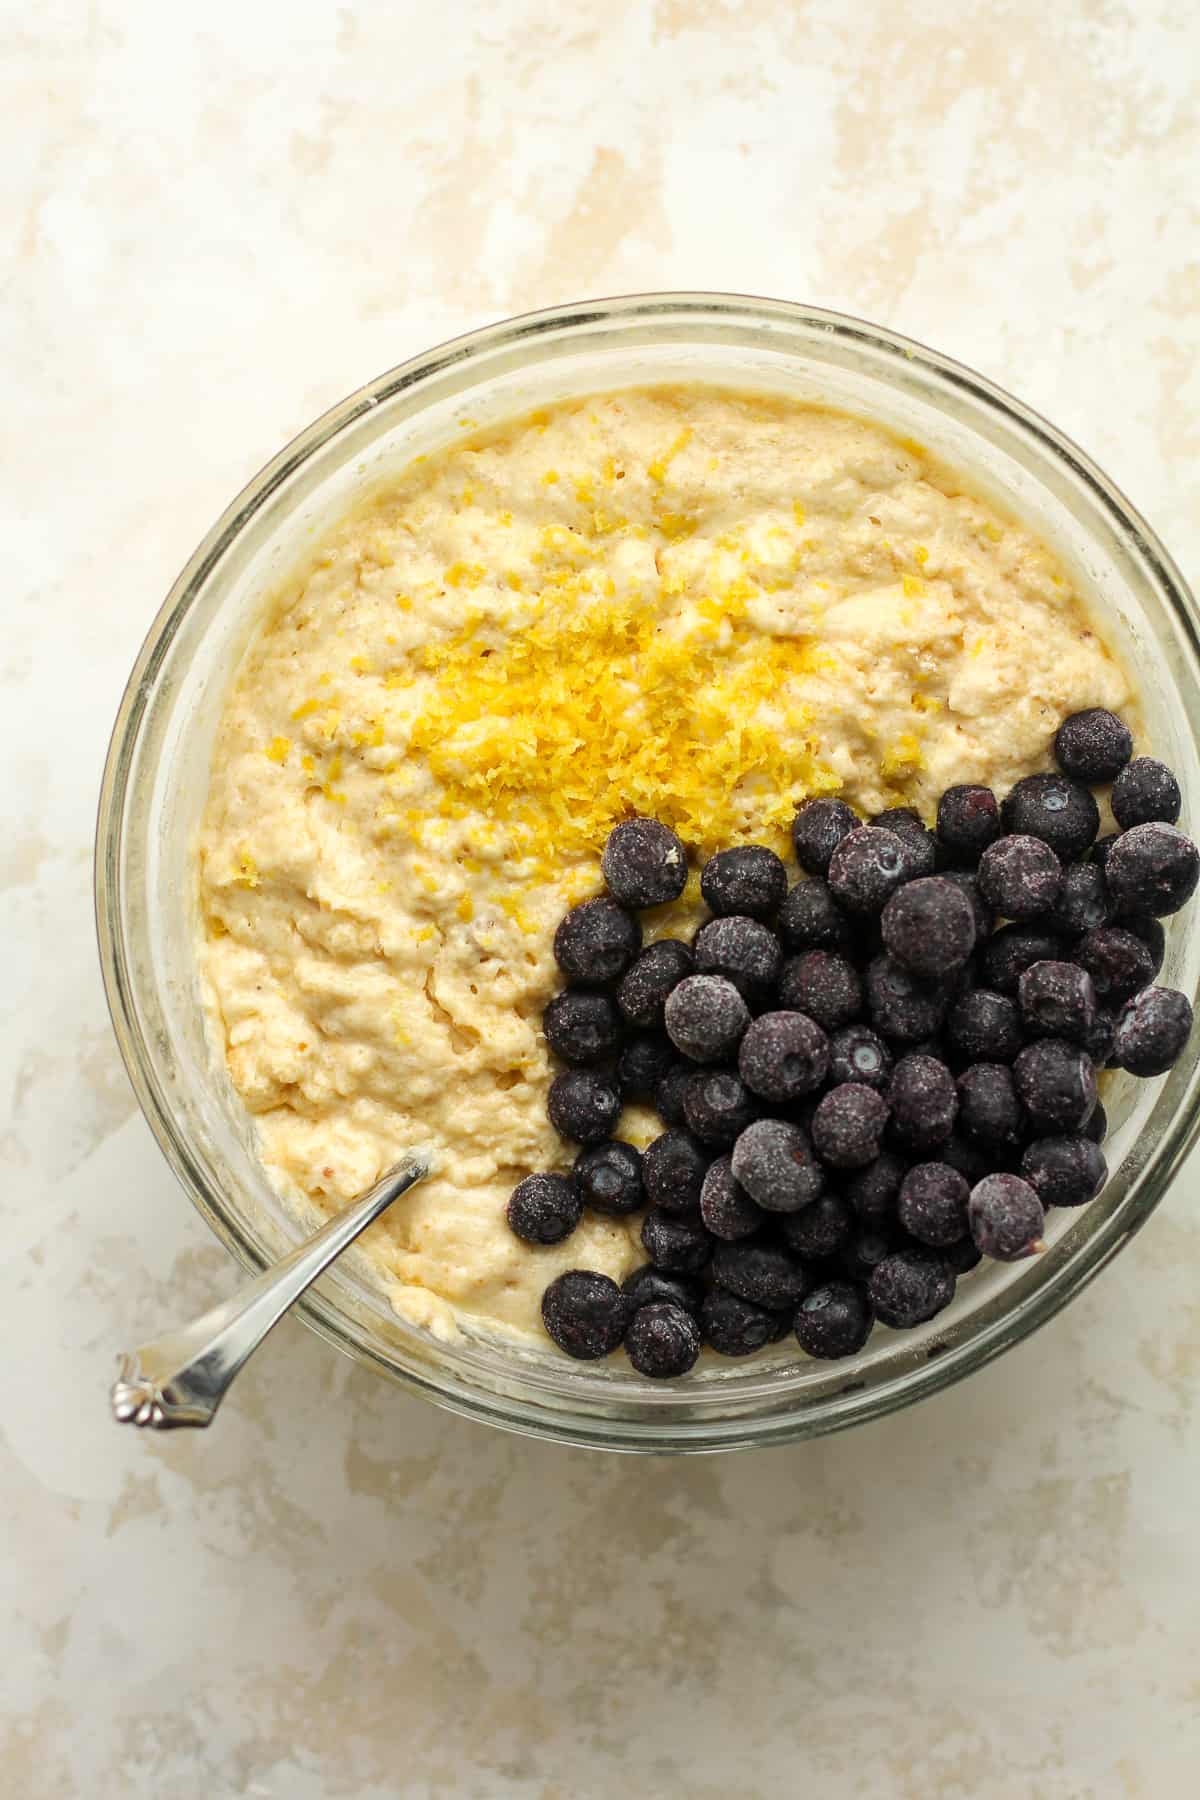 A bowl of the blueberry muffin batter with blueberries and lemon zest on top.